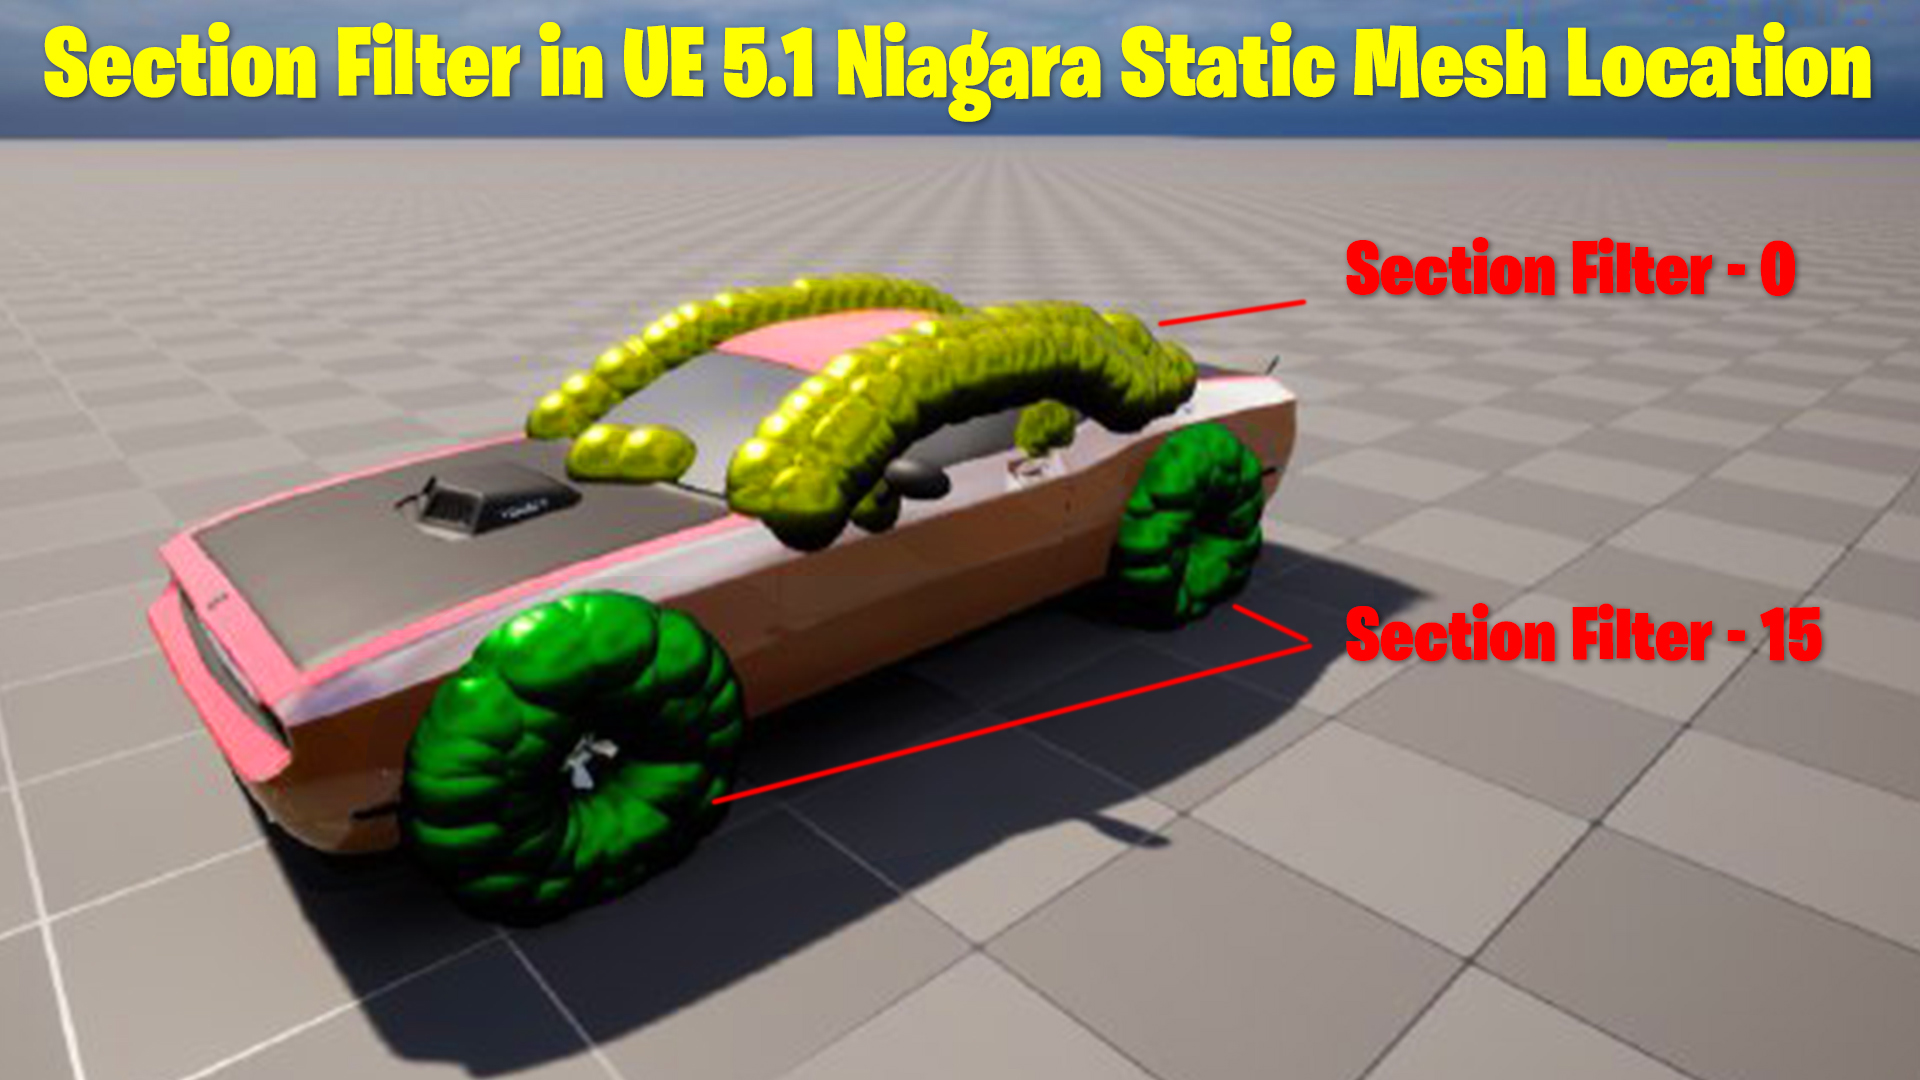 Section Filter in UE 5.1 Niagara Static Mesh Location